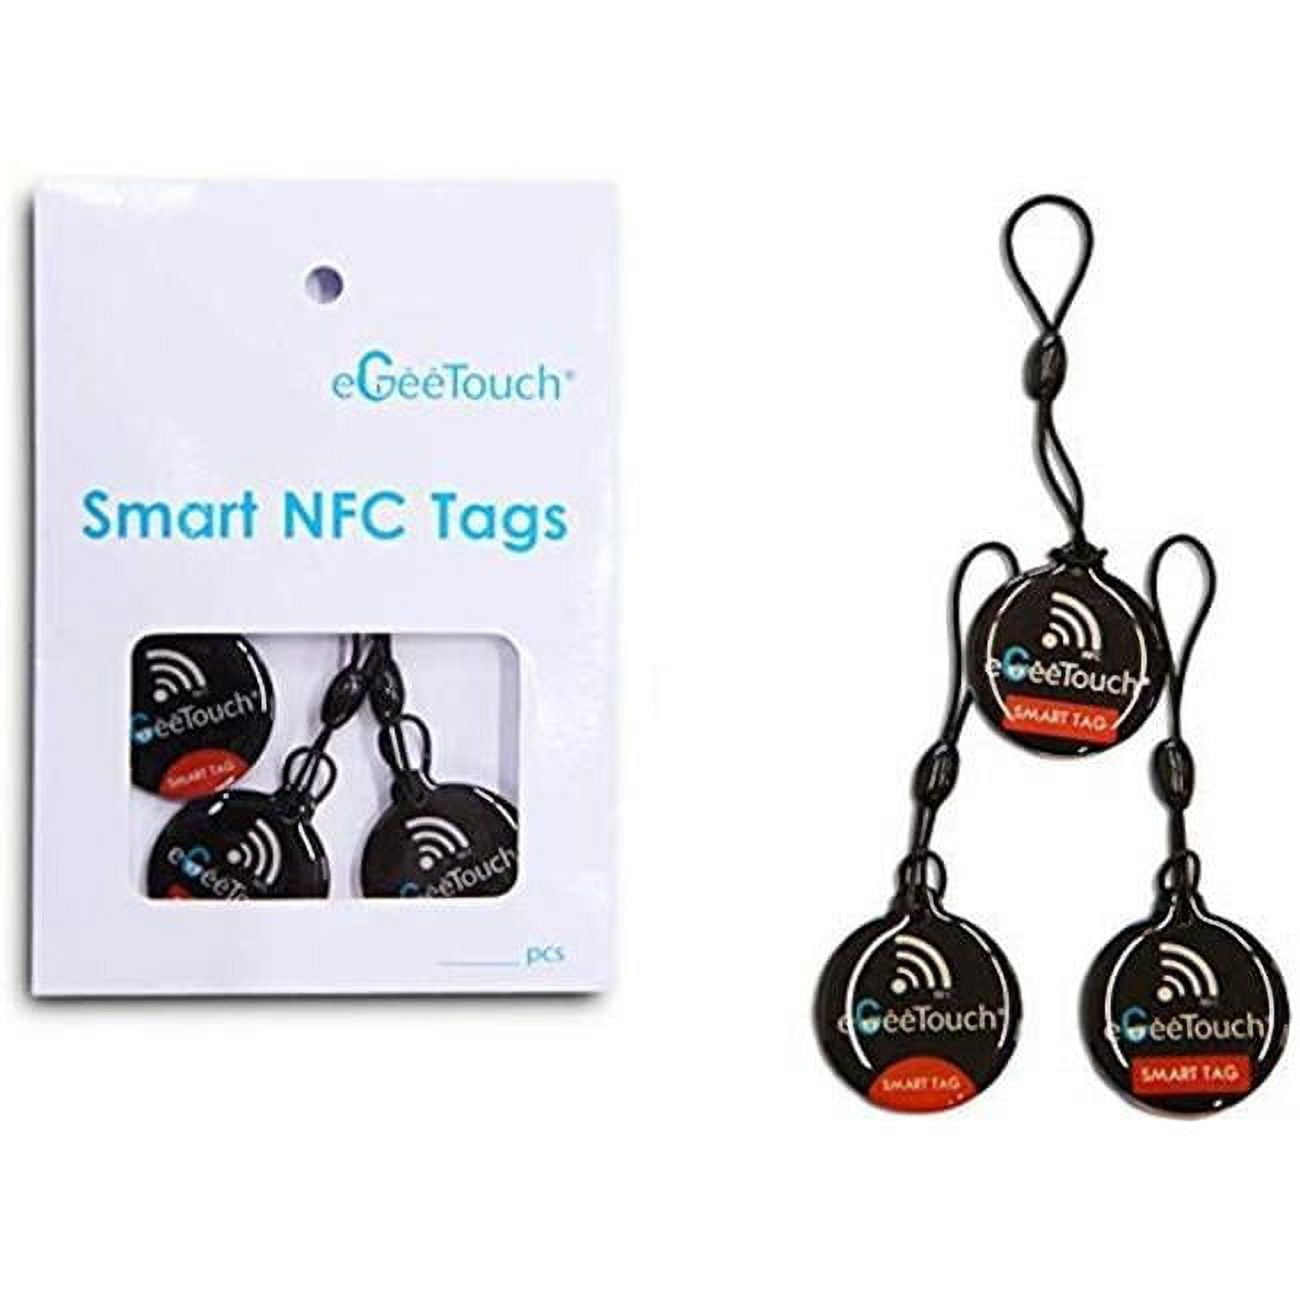 Picture of eGeeTouch 5-ACS-200011 NFC Waterproof Fobs & Tags with Keychain for All eGeeTouch Smart Locks - Pack of 3